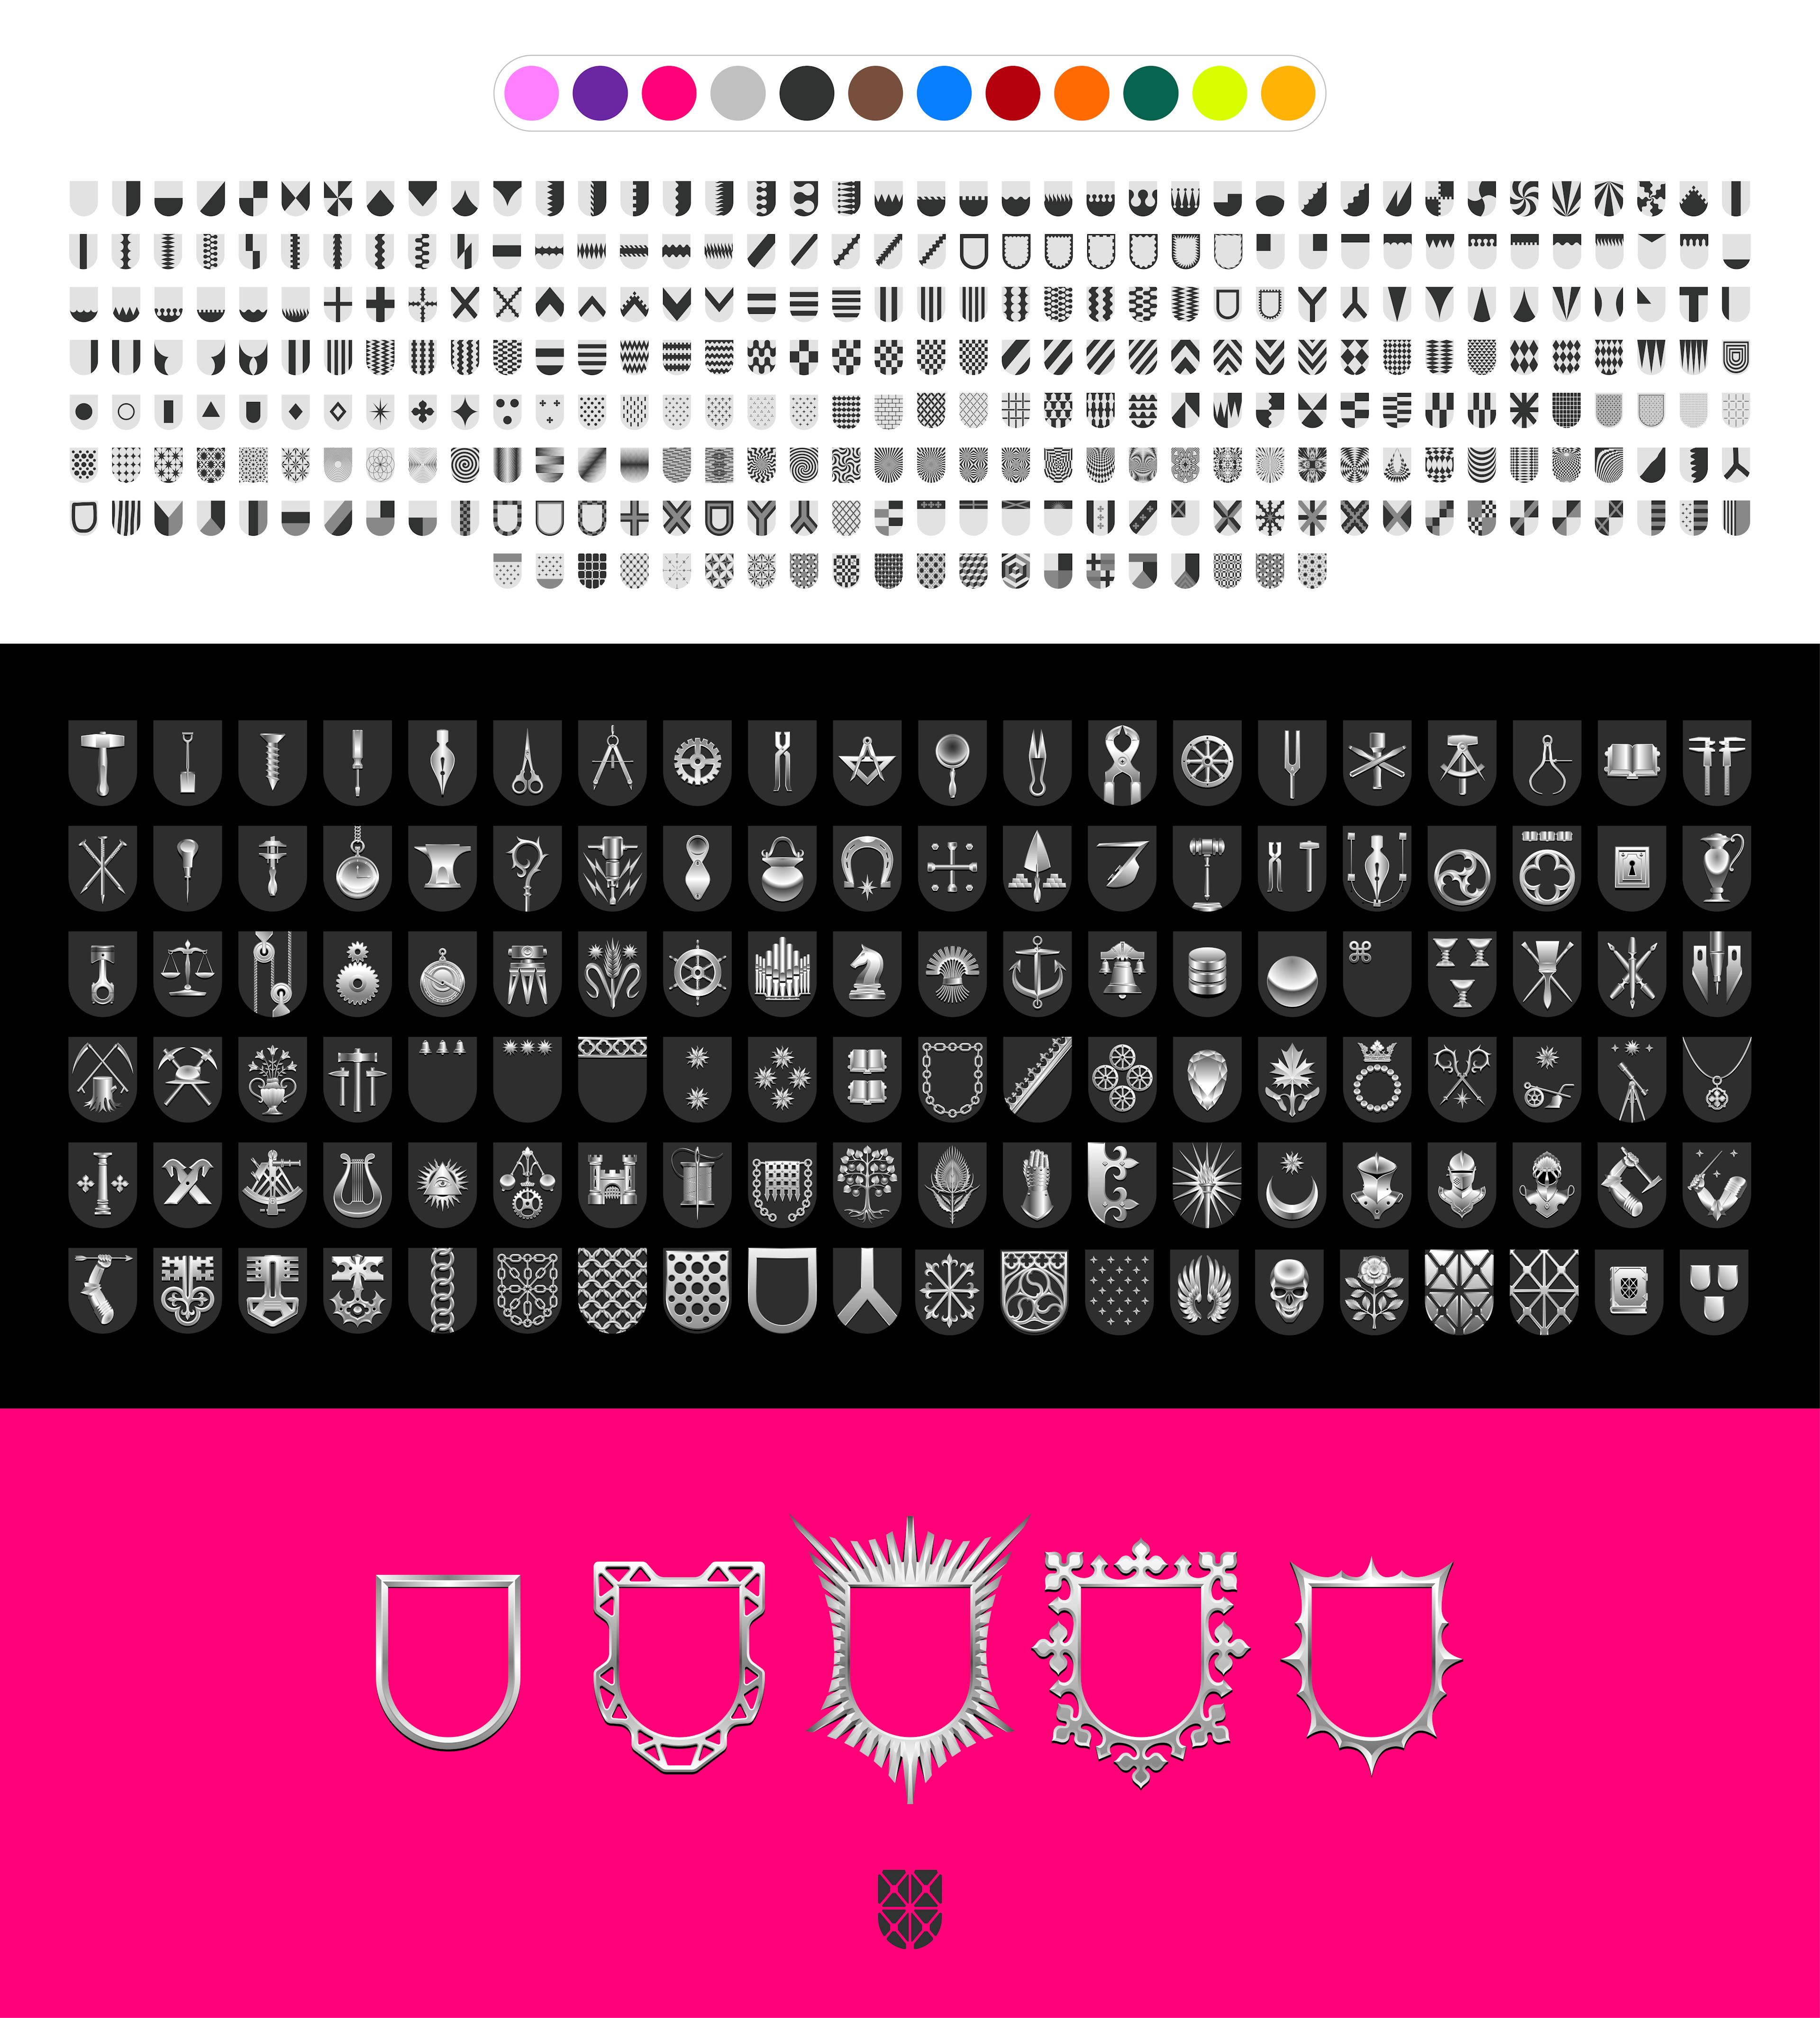 Elements from the Shields design system, consisting of Fields, Colors, Hardware, and Frames.